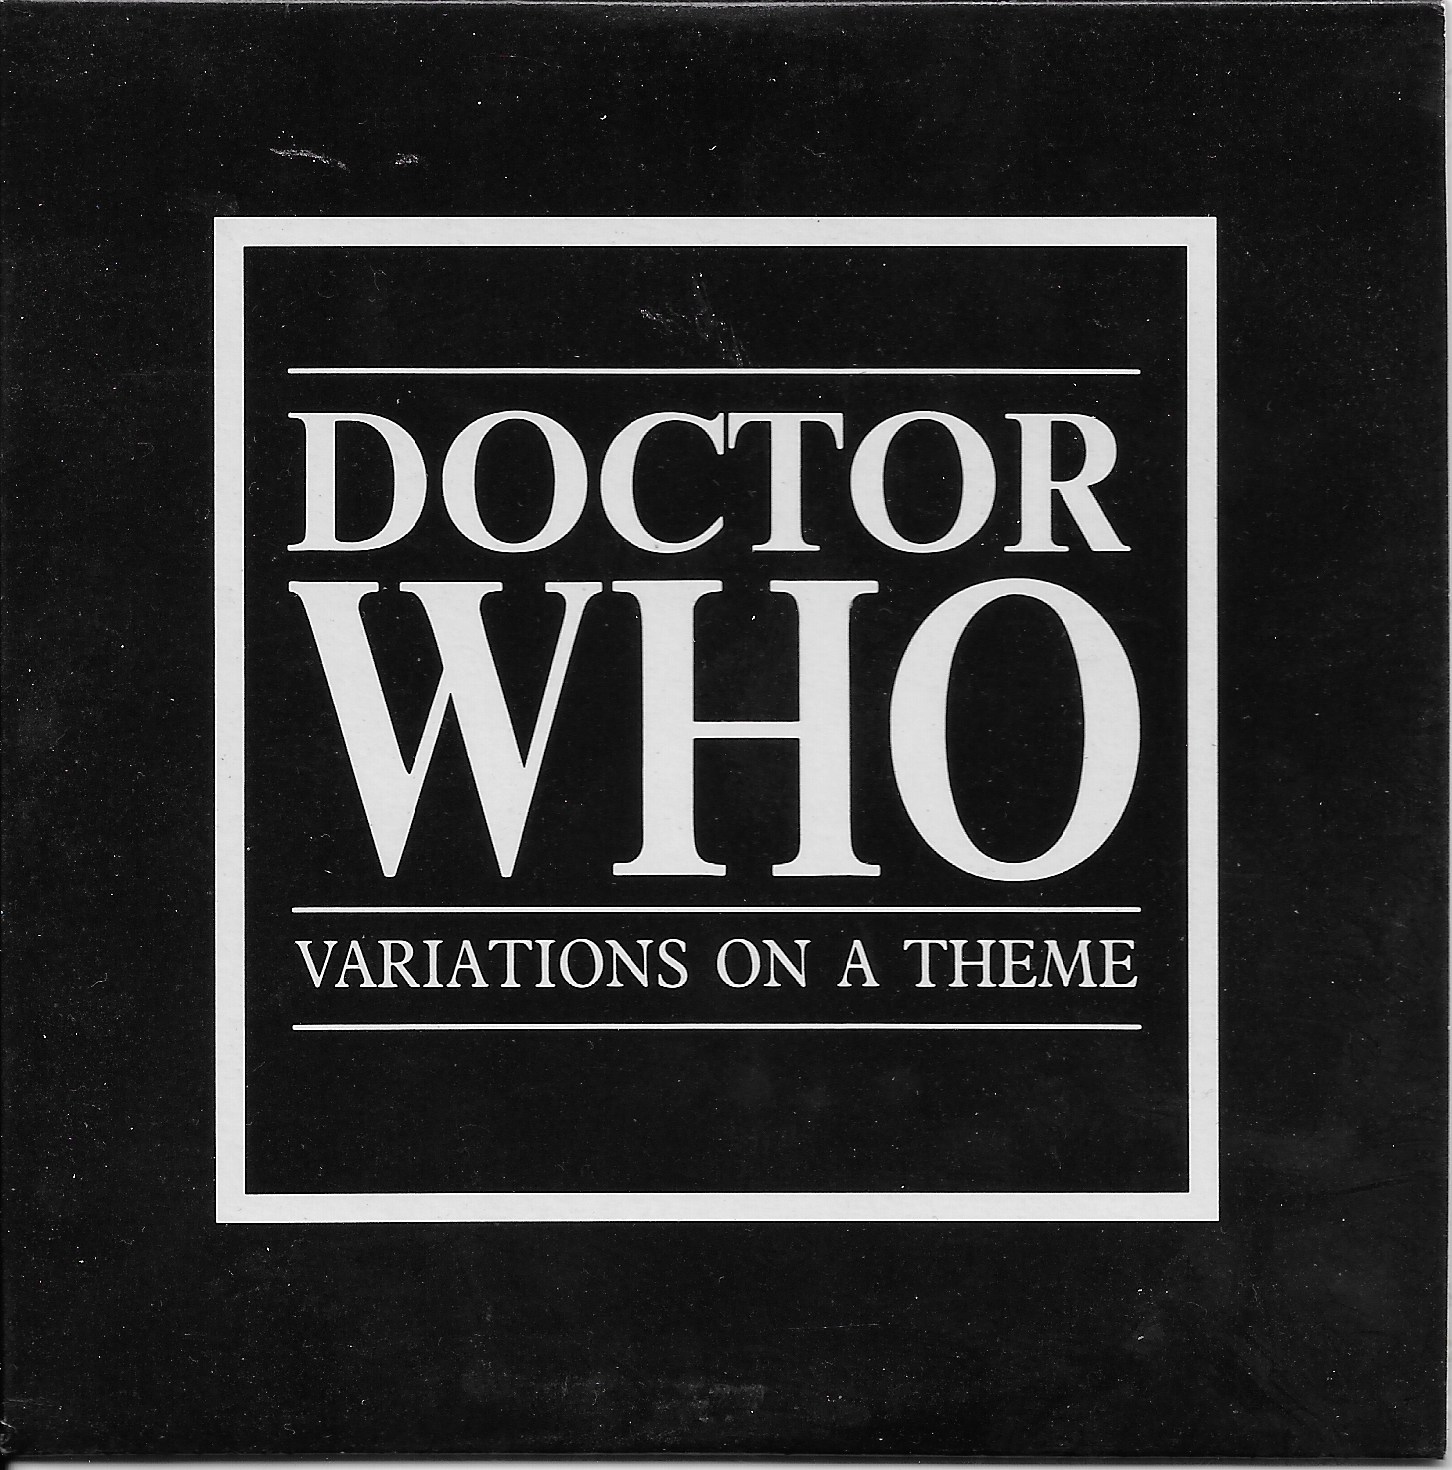 Picture of CD MMI - 4 C Doctor Who - Variations on a theme - Clock face version by artist Ron Grainer from the BBC cdsingles - Records and Tapes library